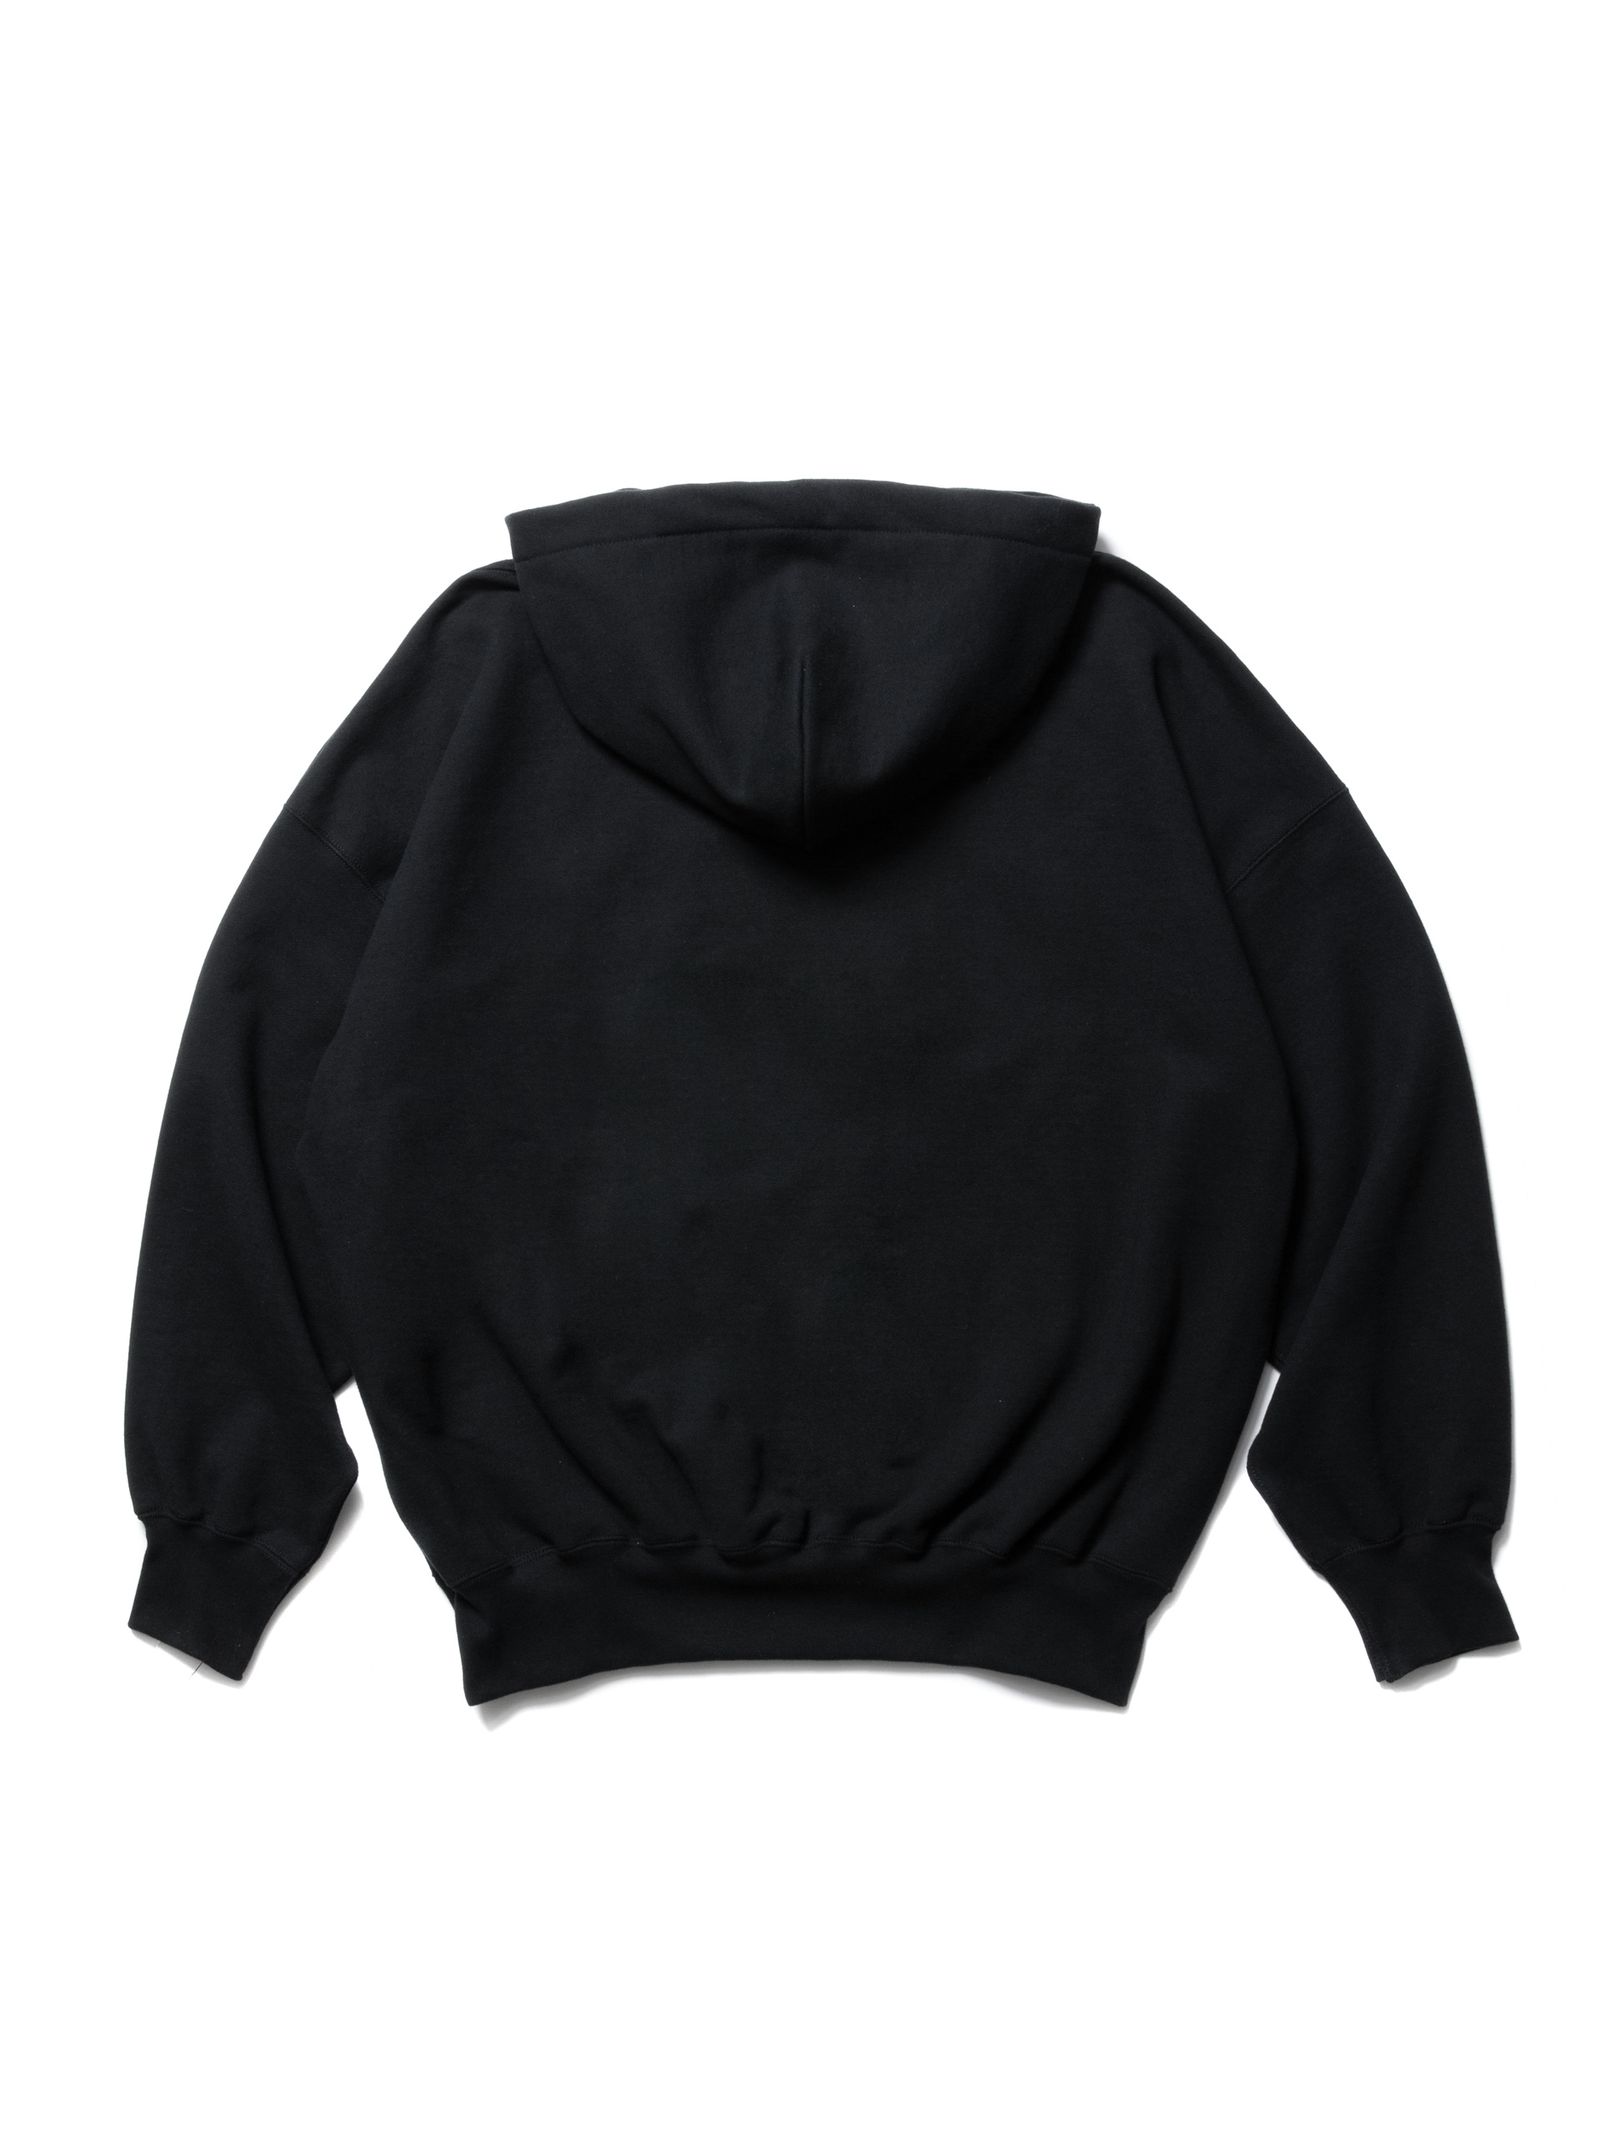 COOTIE PRODUCTIONS - Embroidery Sweat Hoodie ...